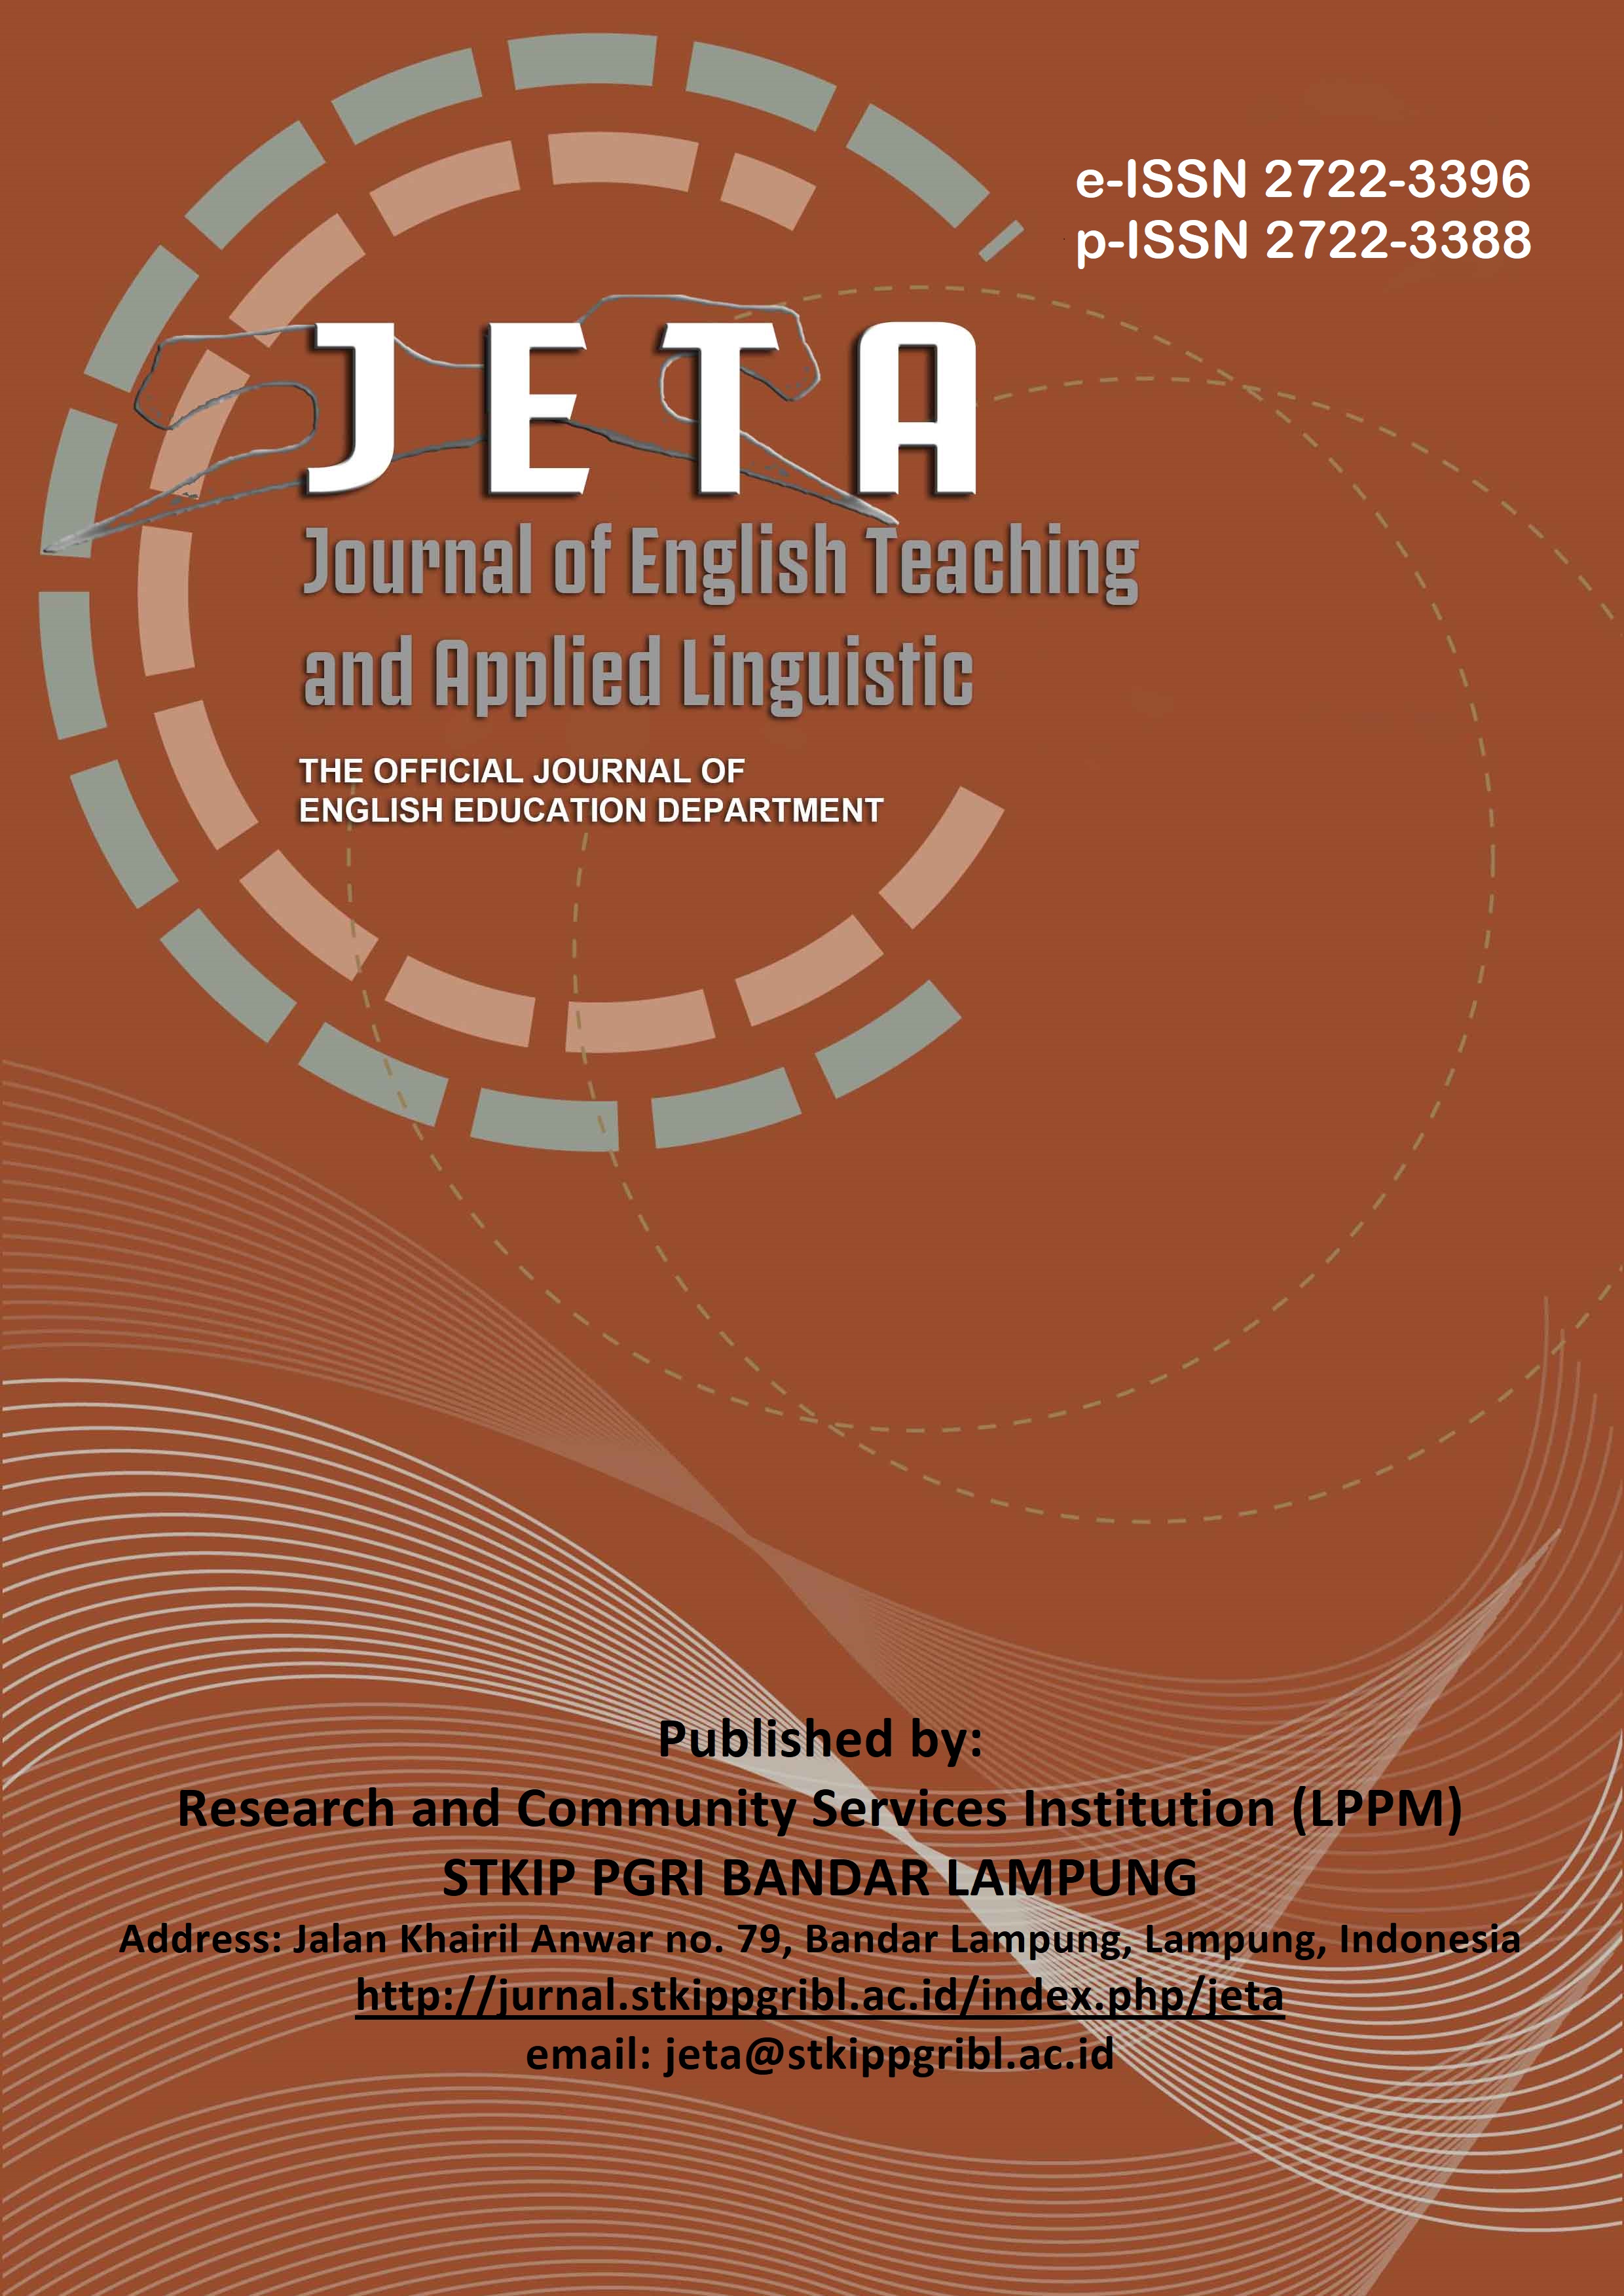 					View Vol. 2 No. 1 (2021): JETA: Journal of English Teaching and Applied Linguistic
				